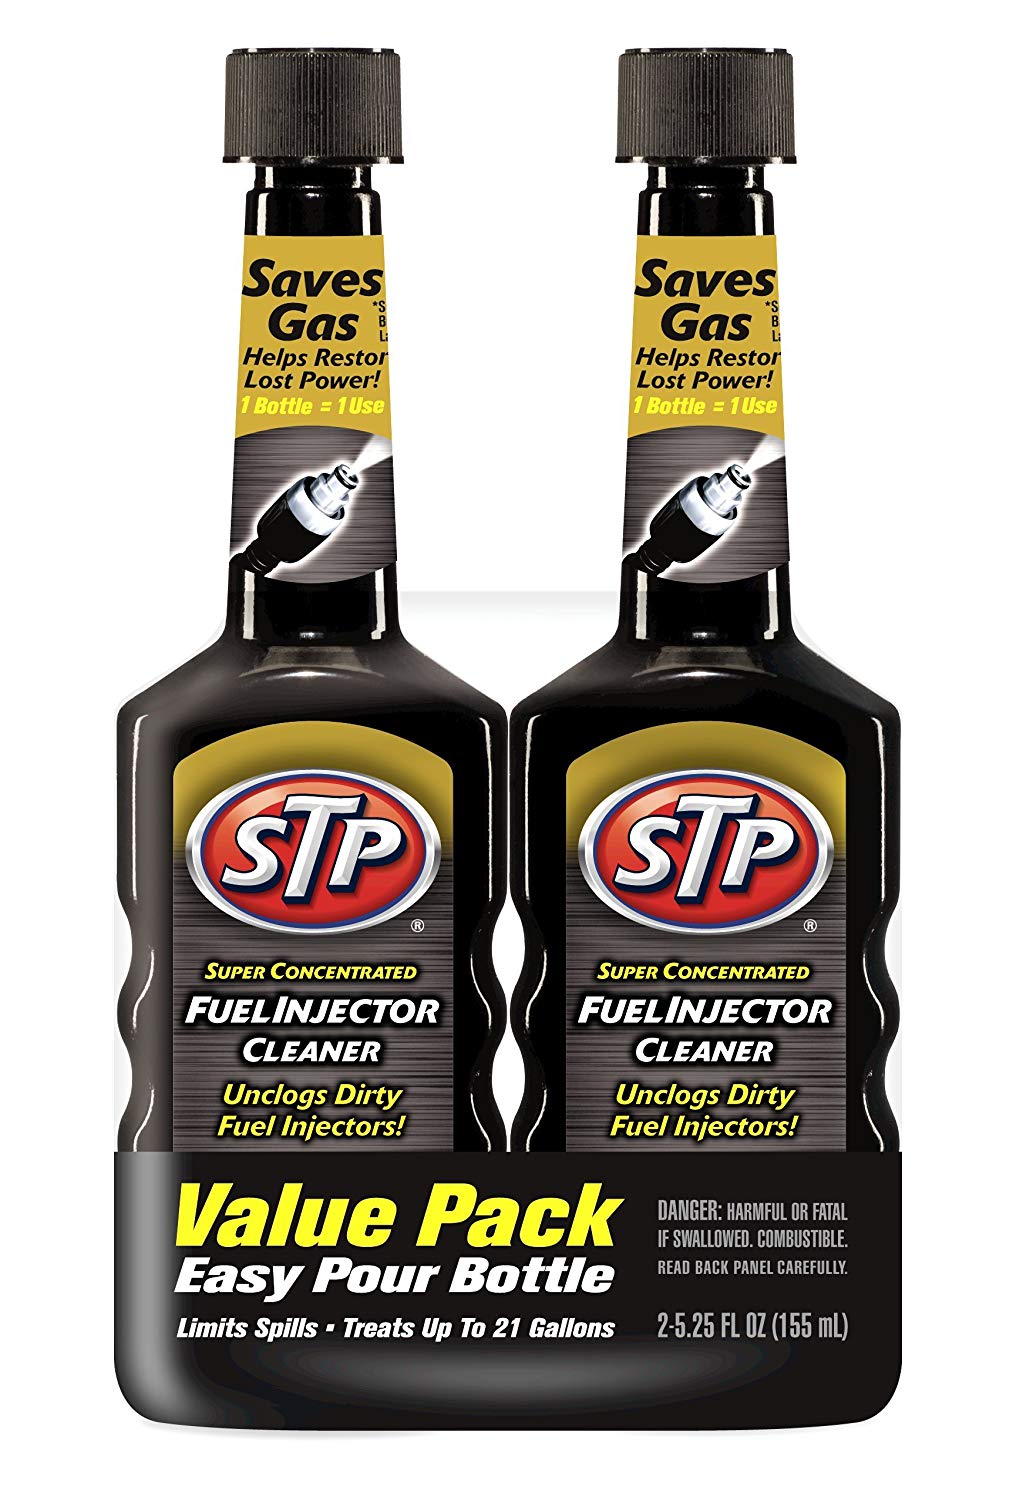 stp fuel injector cleaner